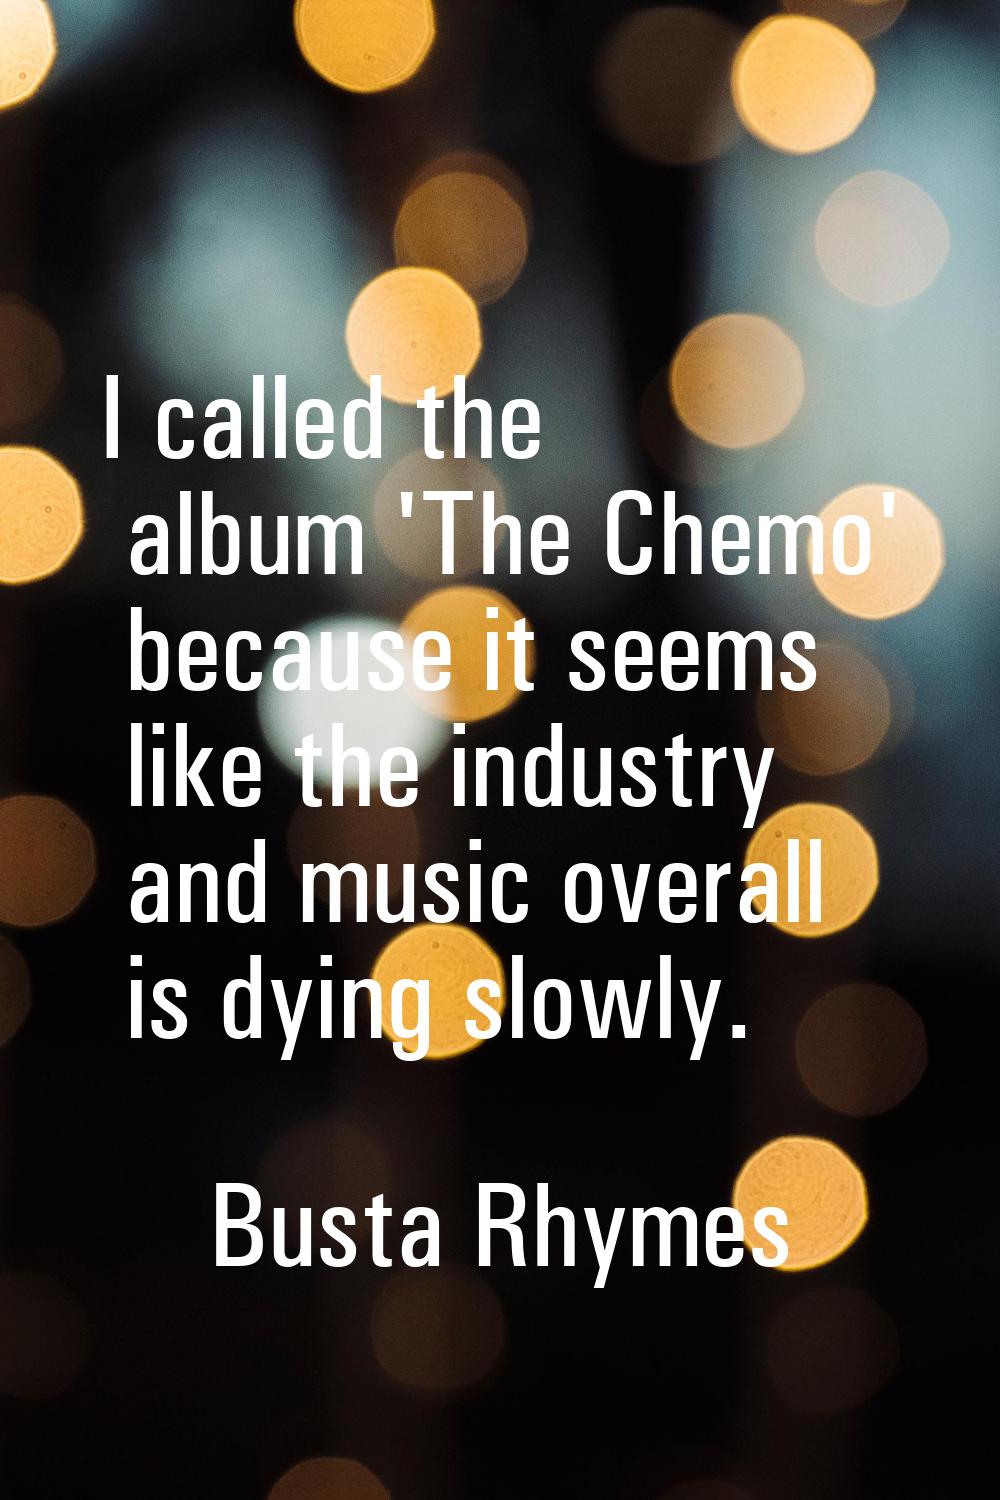 I called the album 'The Chemo' because it seems like the industry and music overall is dying slowly